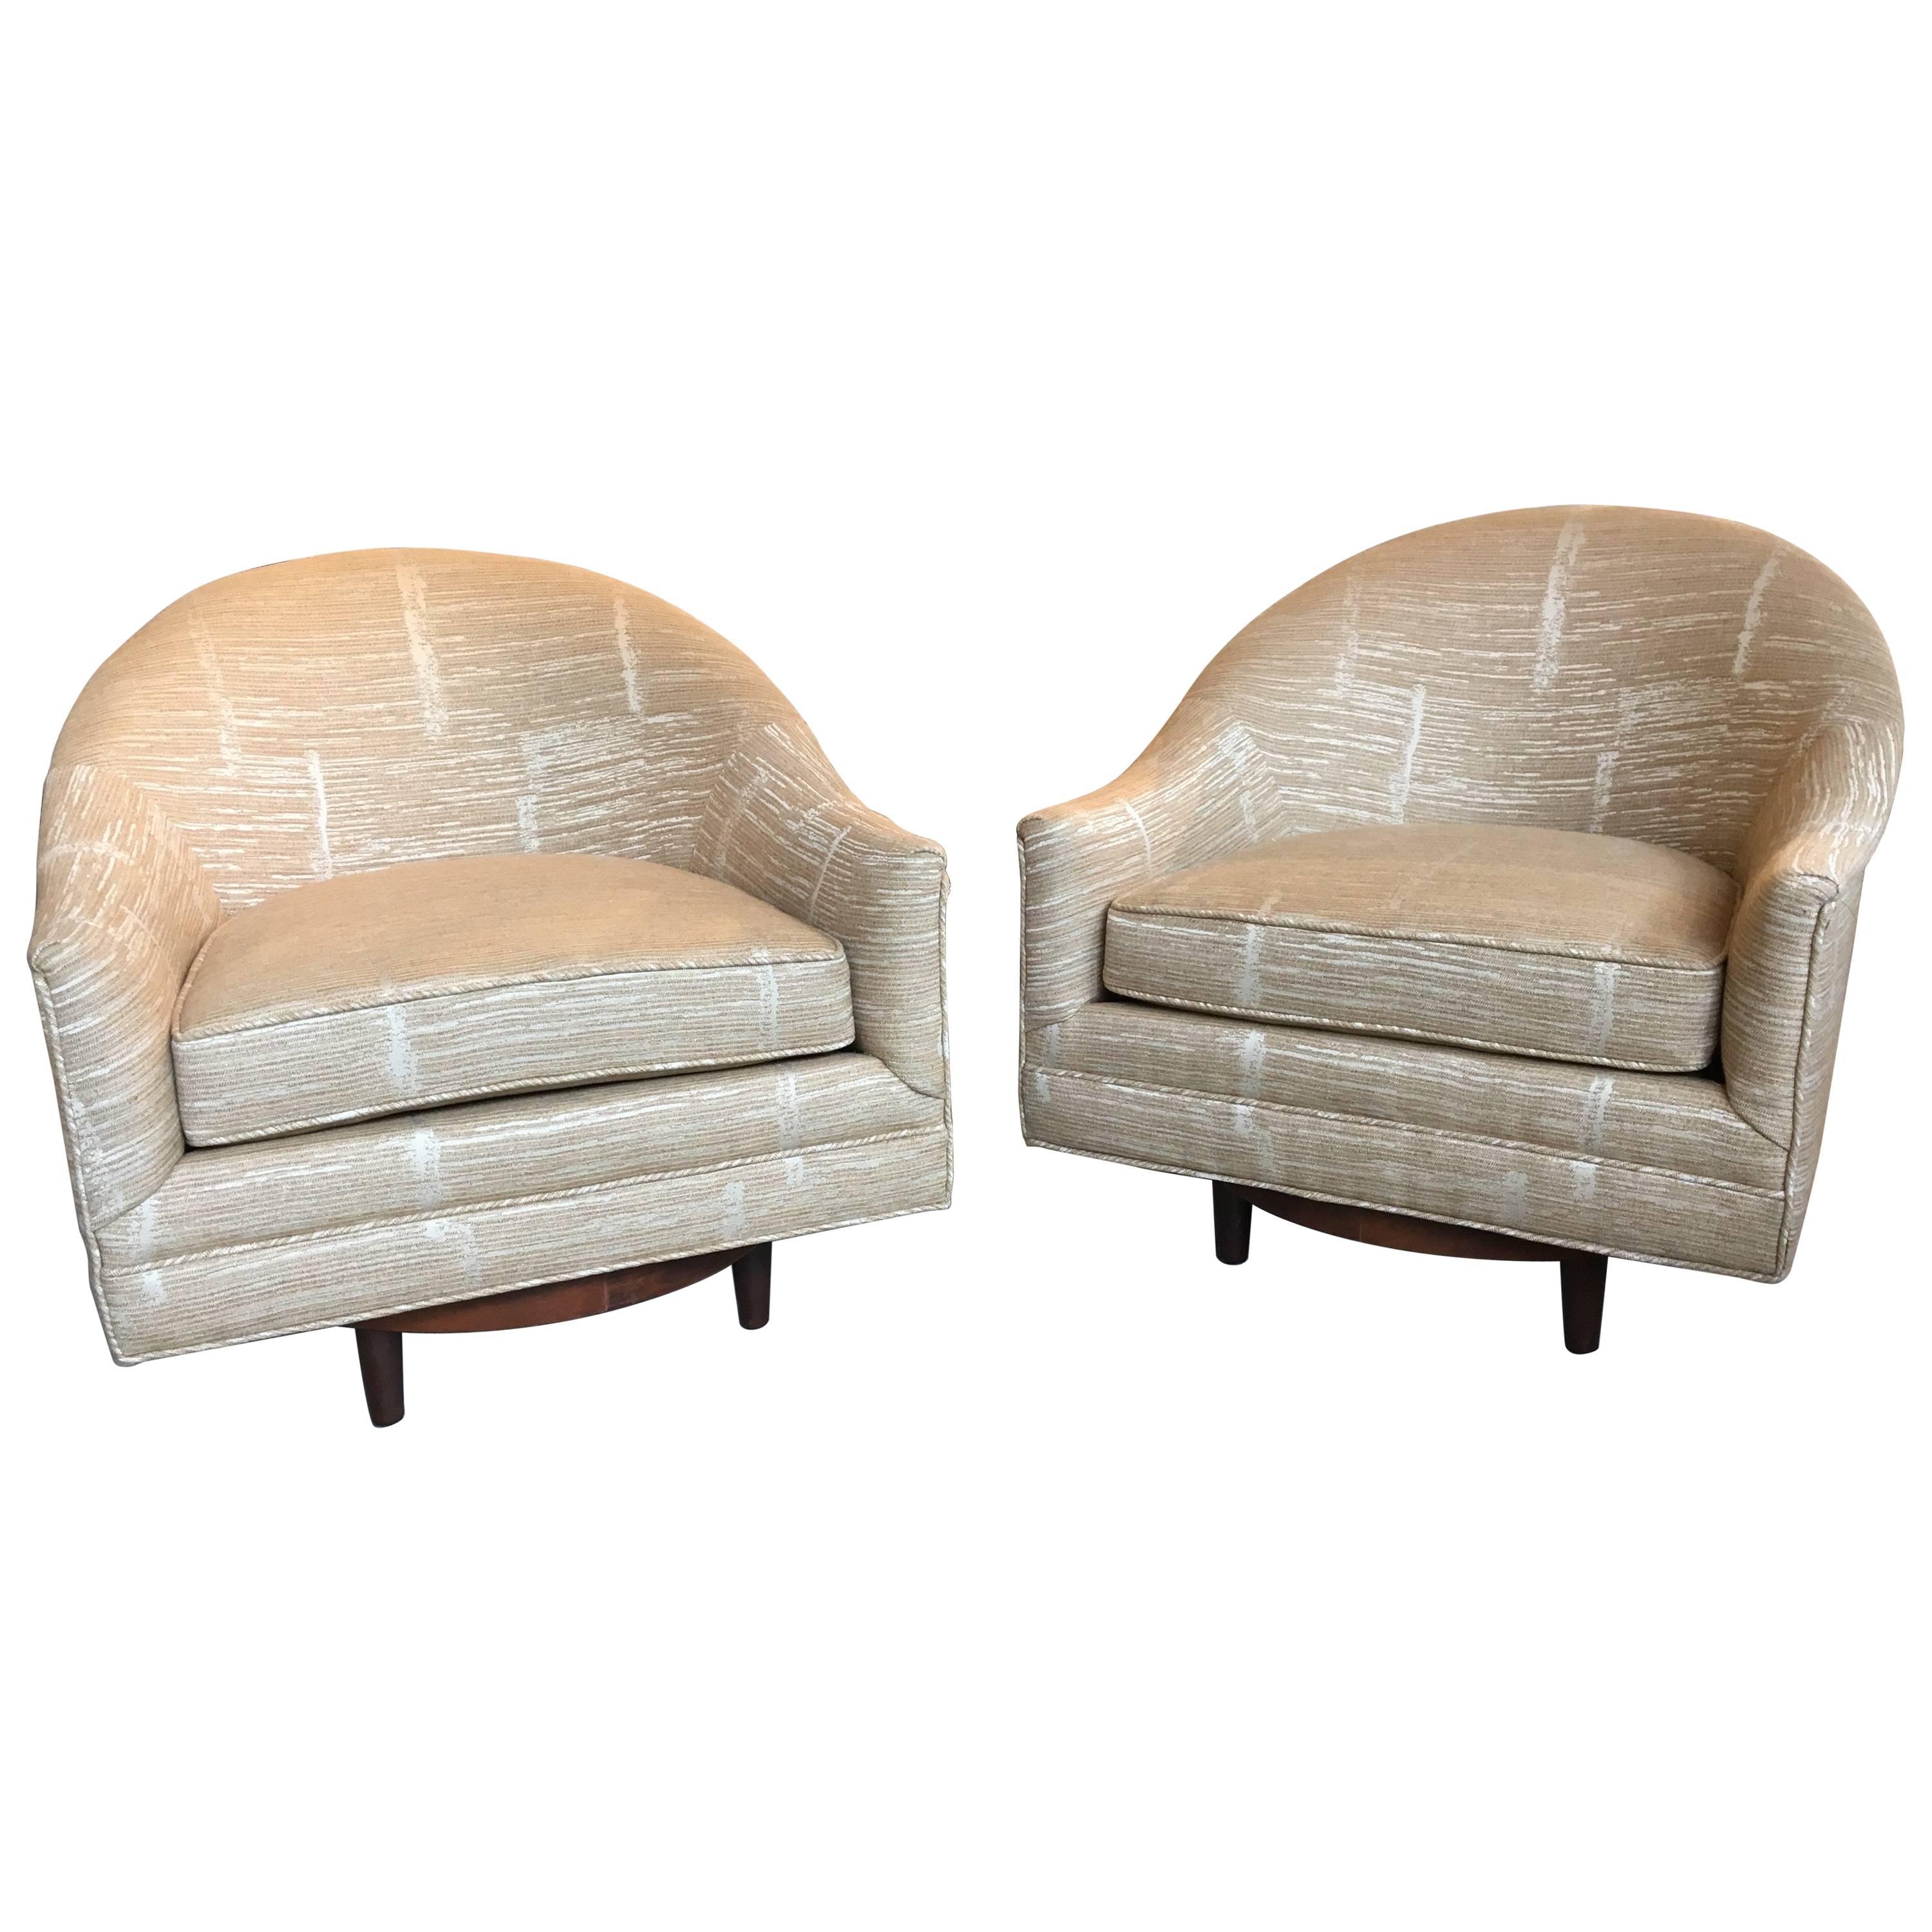 Pair of Scandinavian Swivel Chairs by Selig with Walnut Bases and New Upholstery